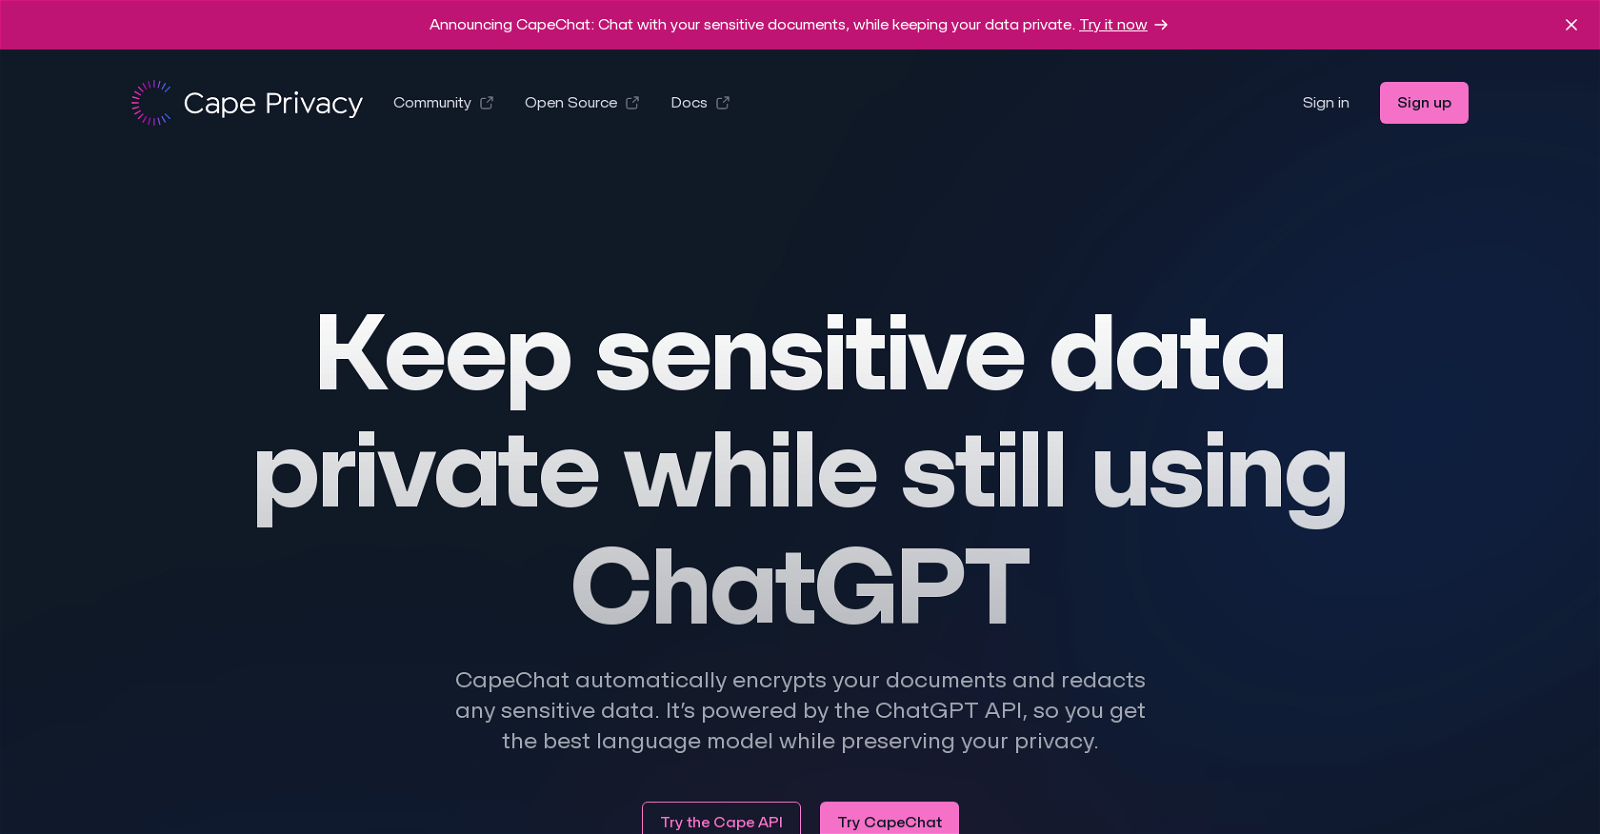 Capeprivacy website